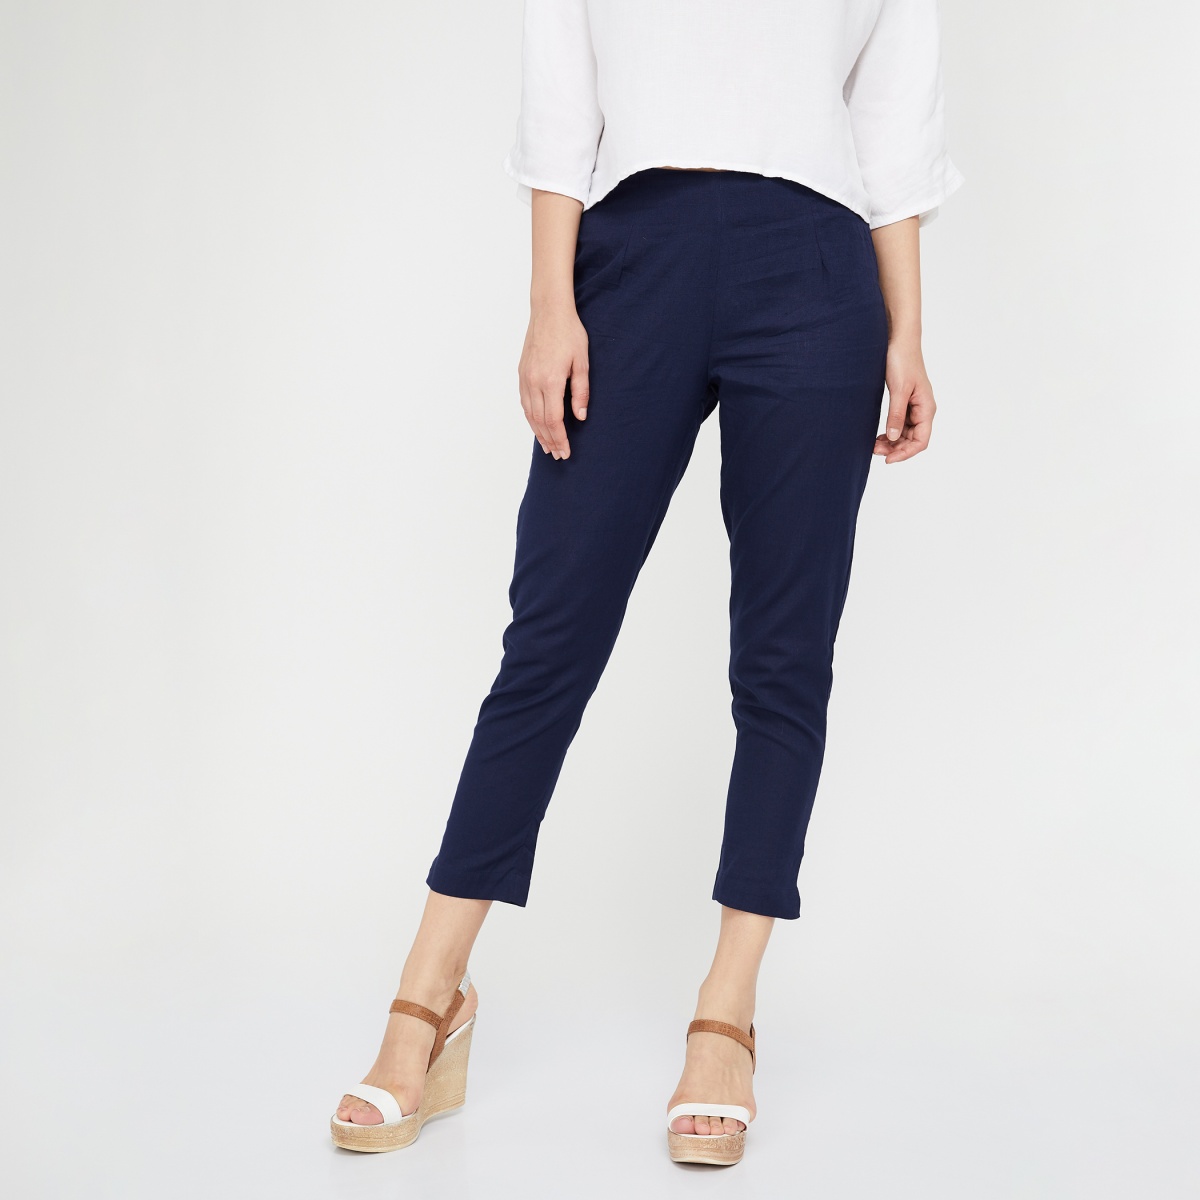 Elleven Trousers and Pants  Buy Elleven Blue Ankle Length Jersy Pants  Online  Nykaa Fashion